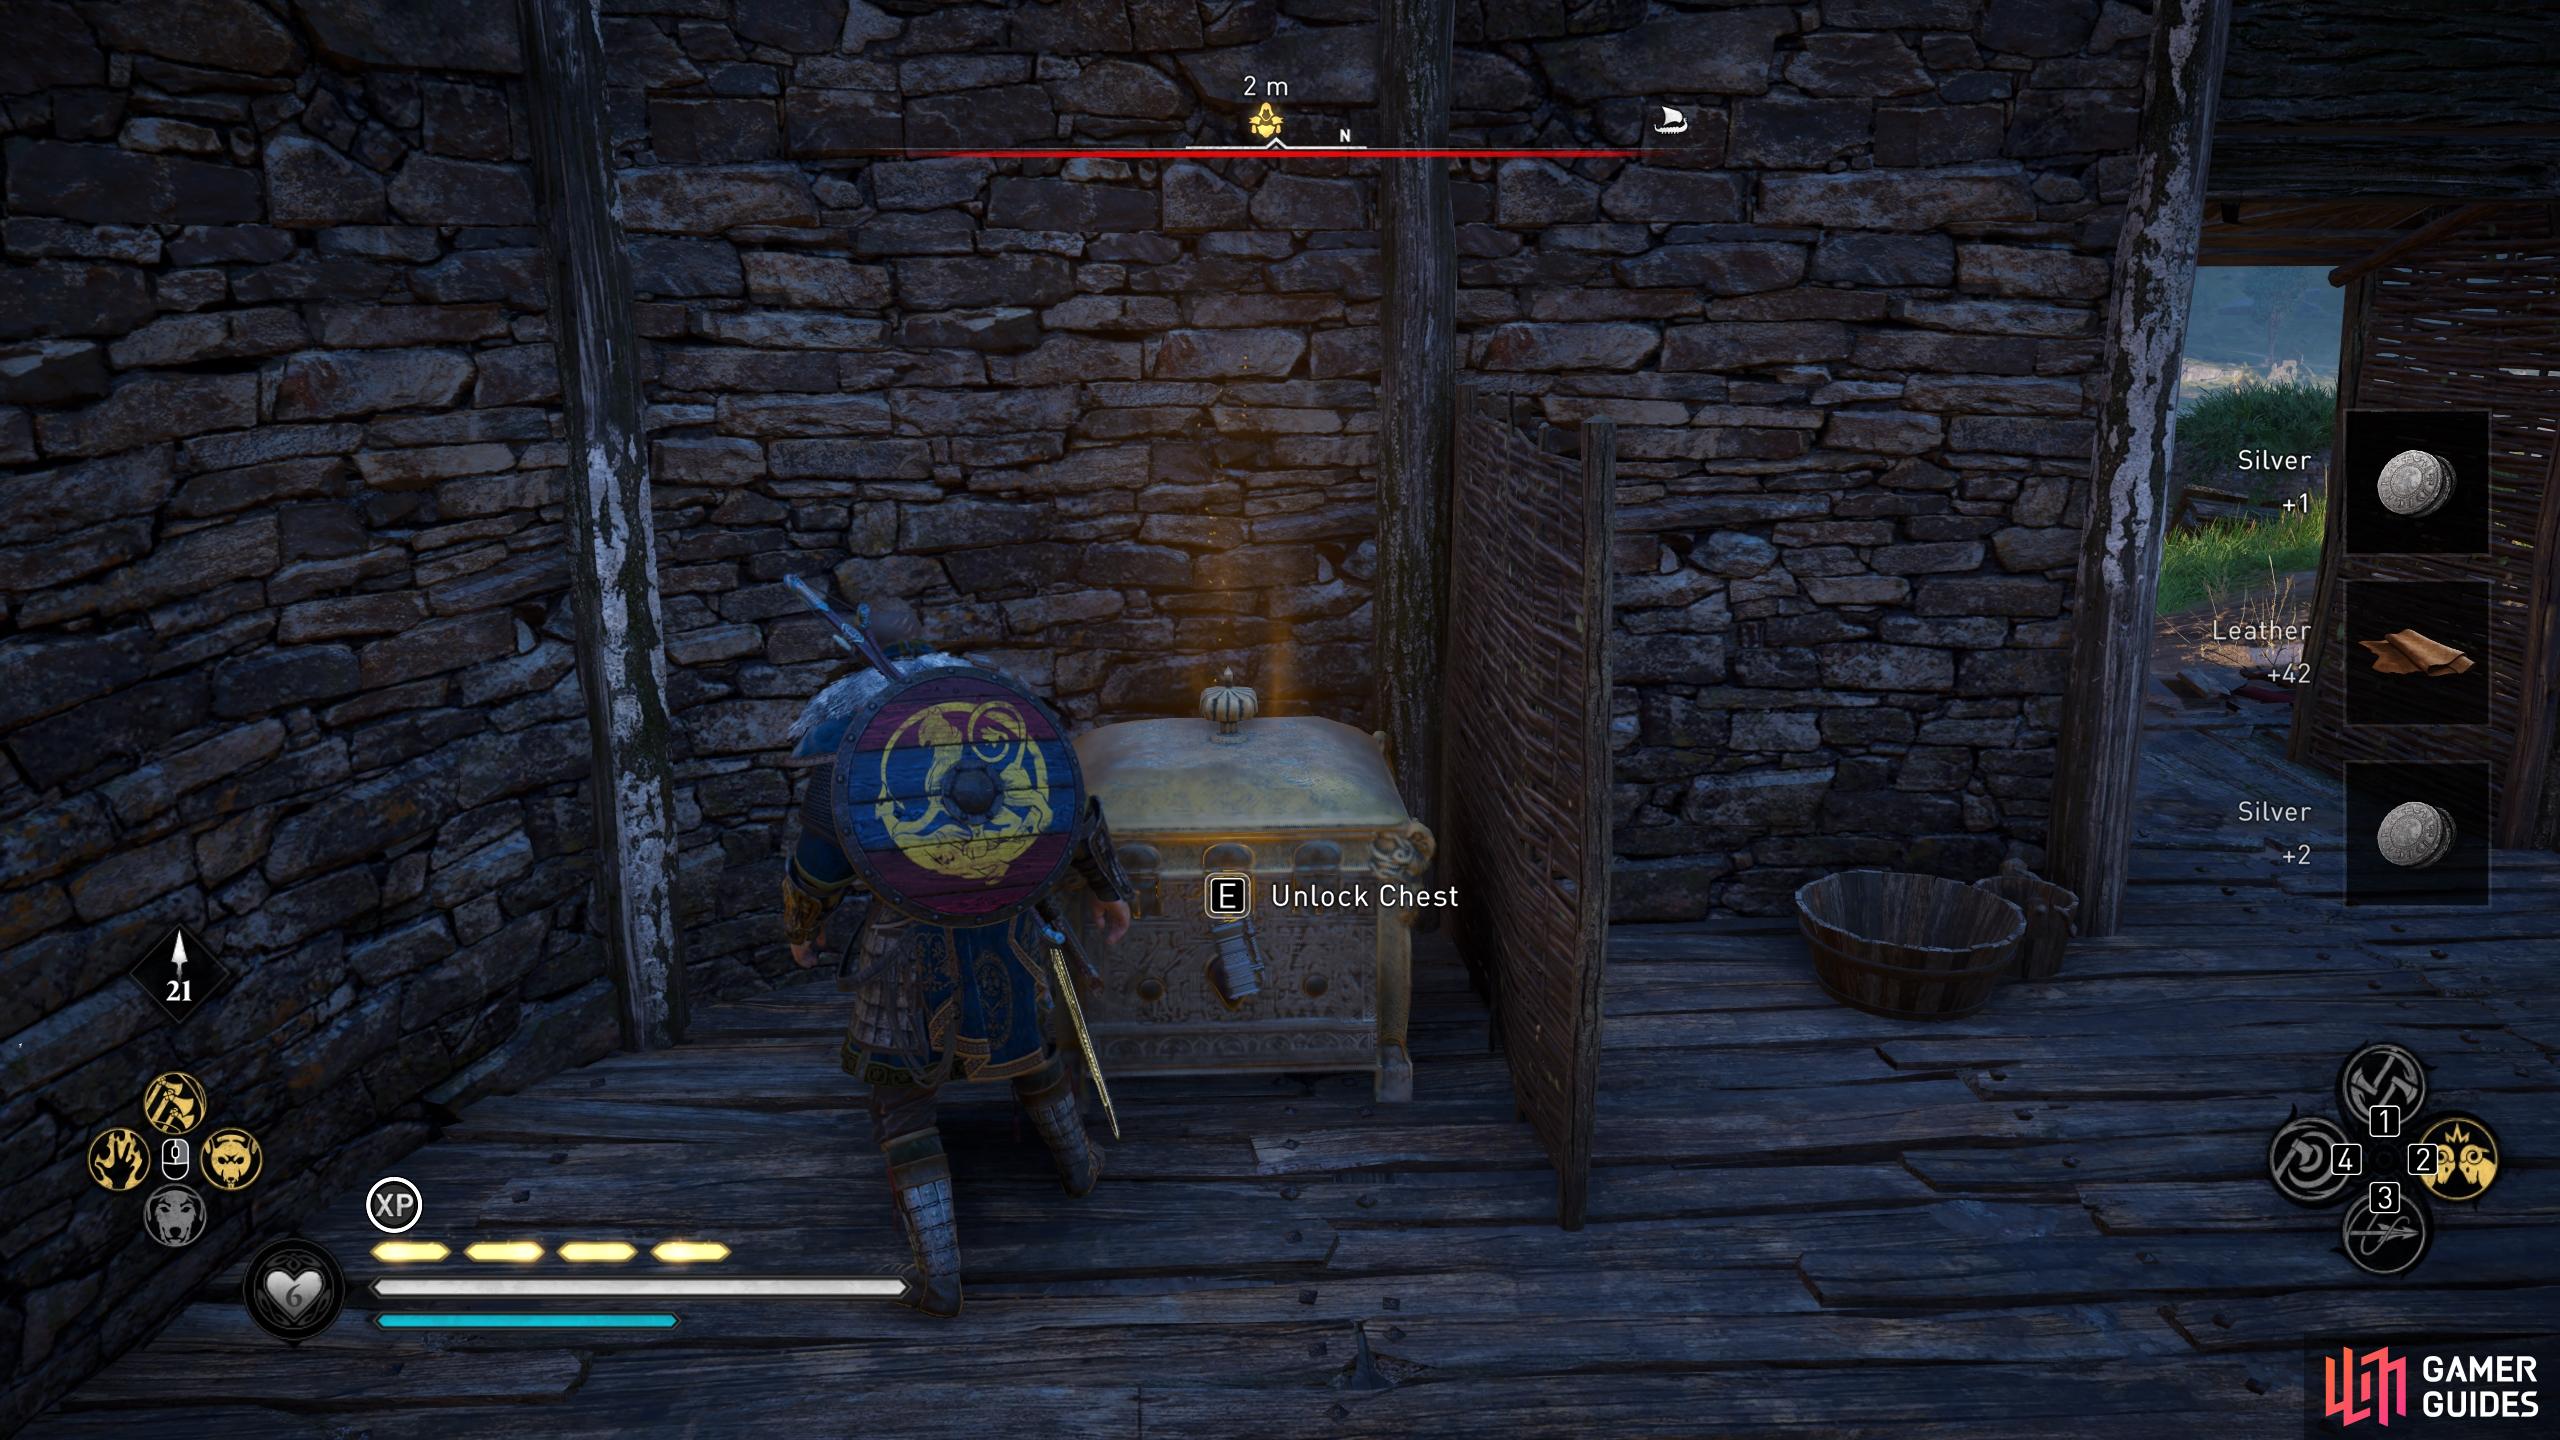 You'll find the chest in a small building within the camp.